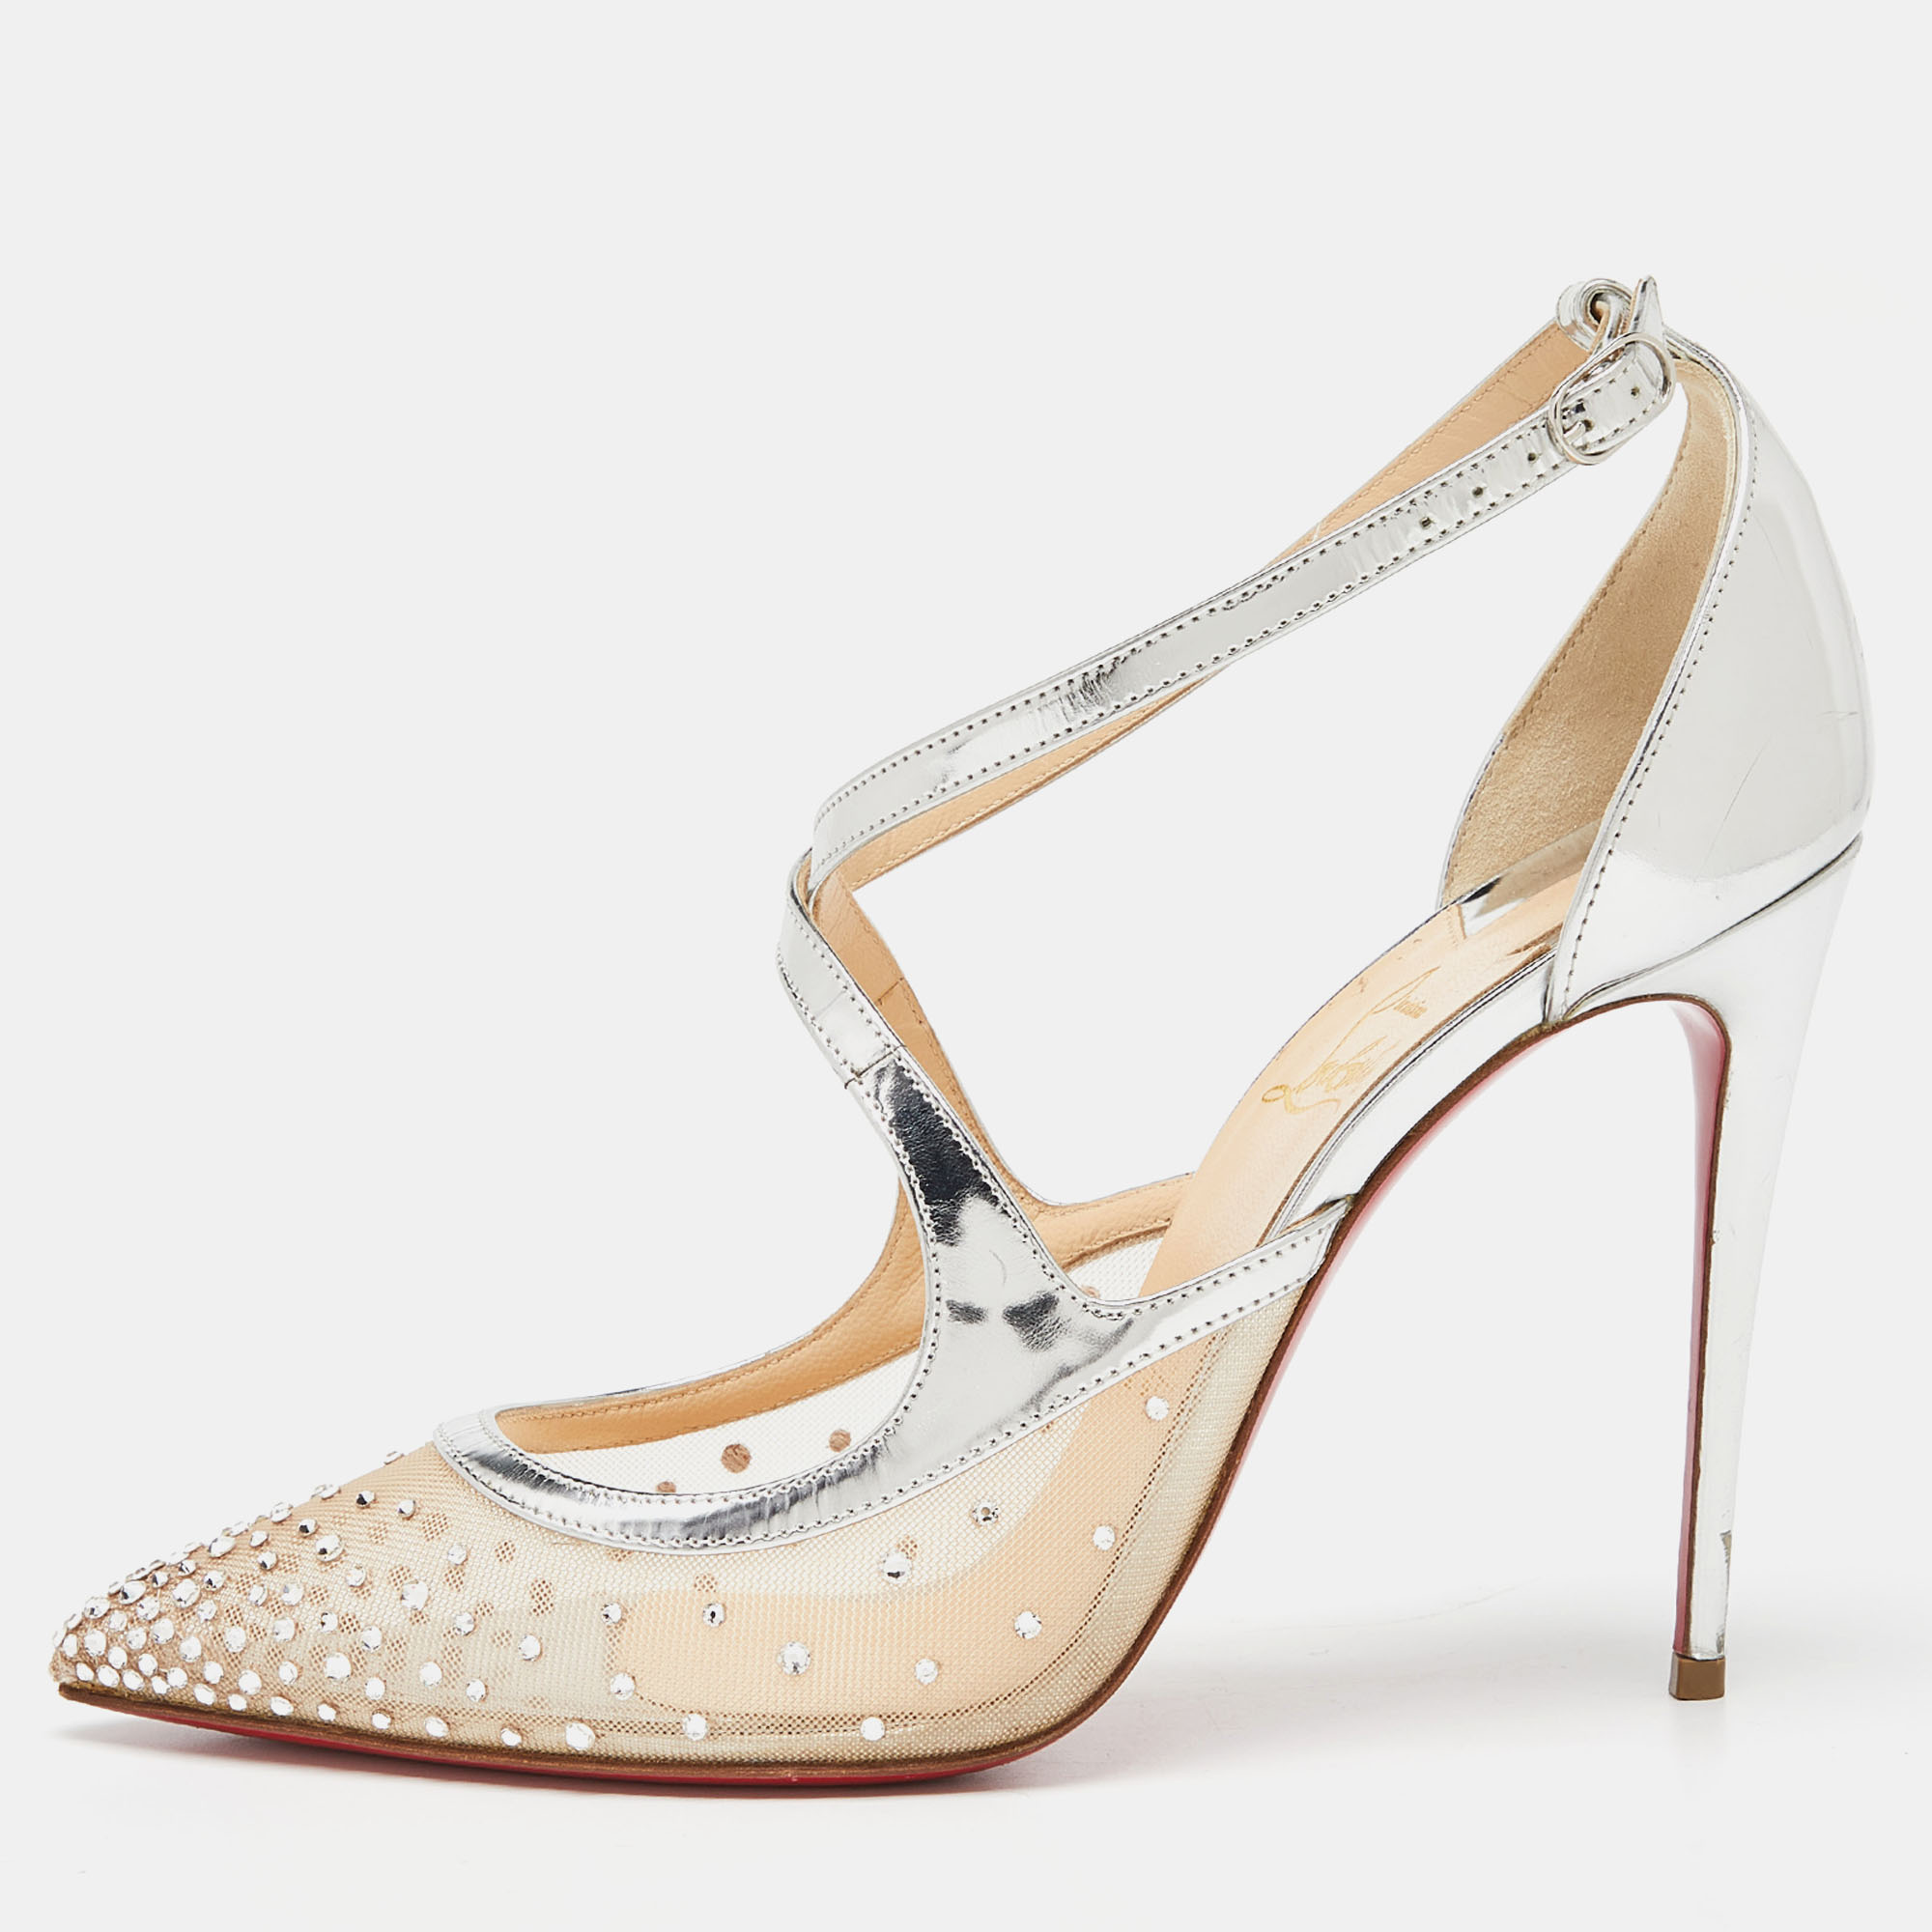 Christian Louboutin Silver Patent Leather And Mesh Twistissima Strass Pumps Size 39